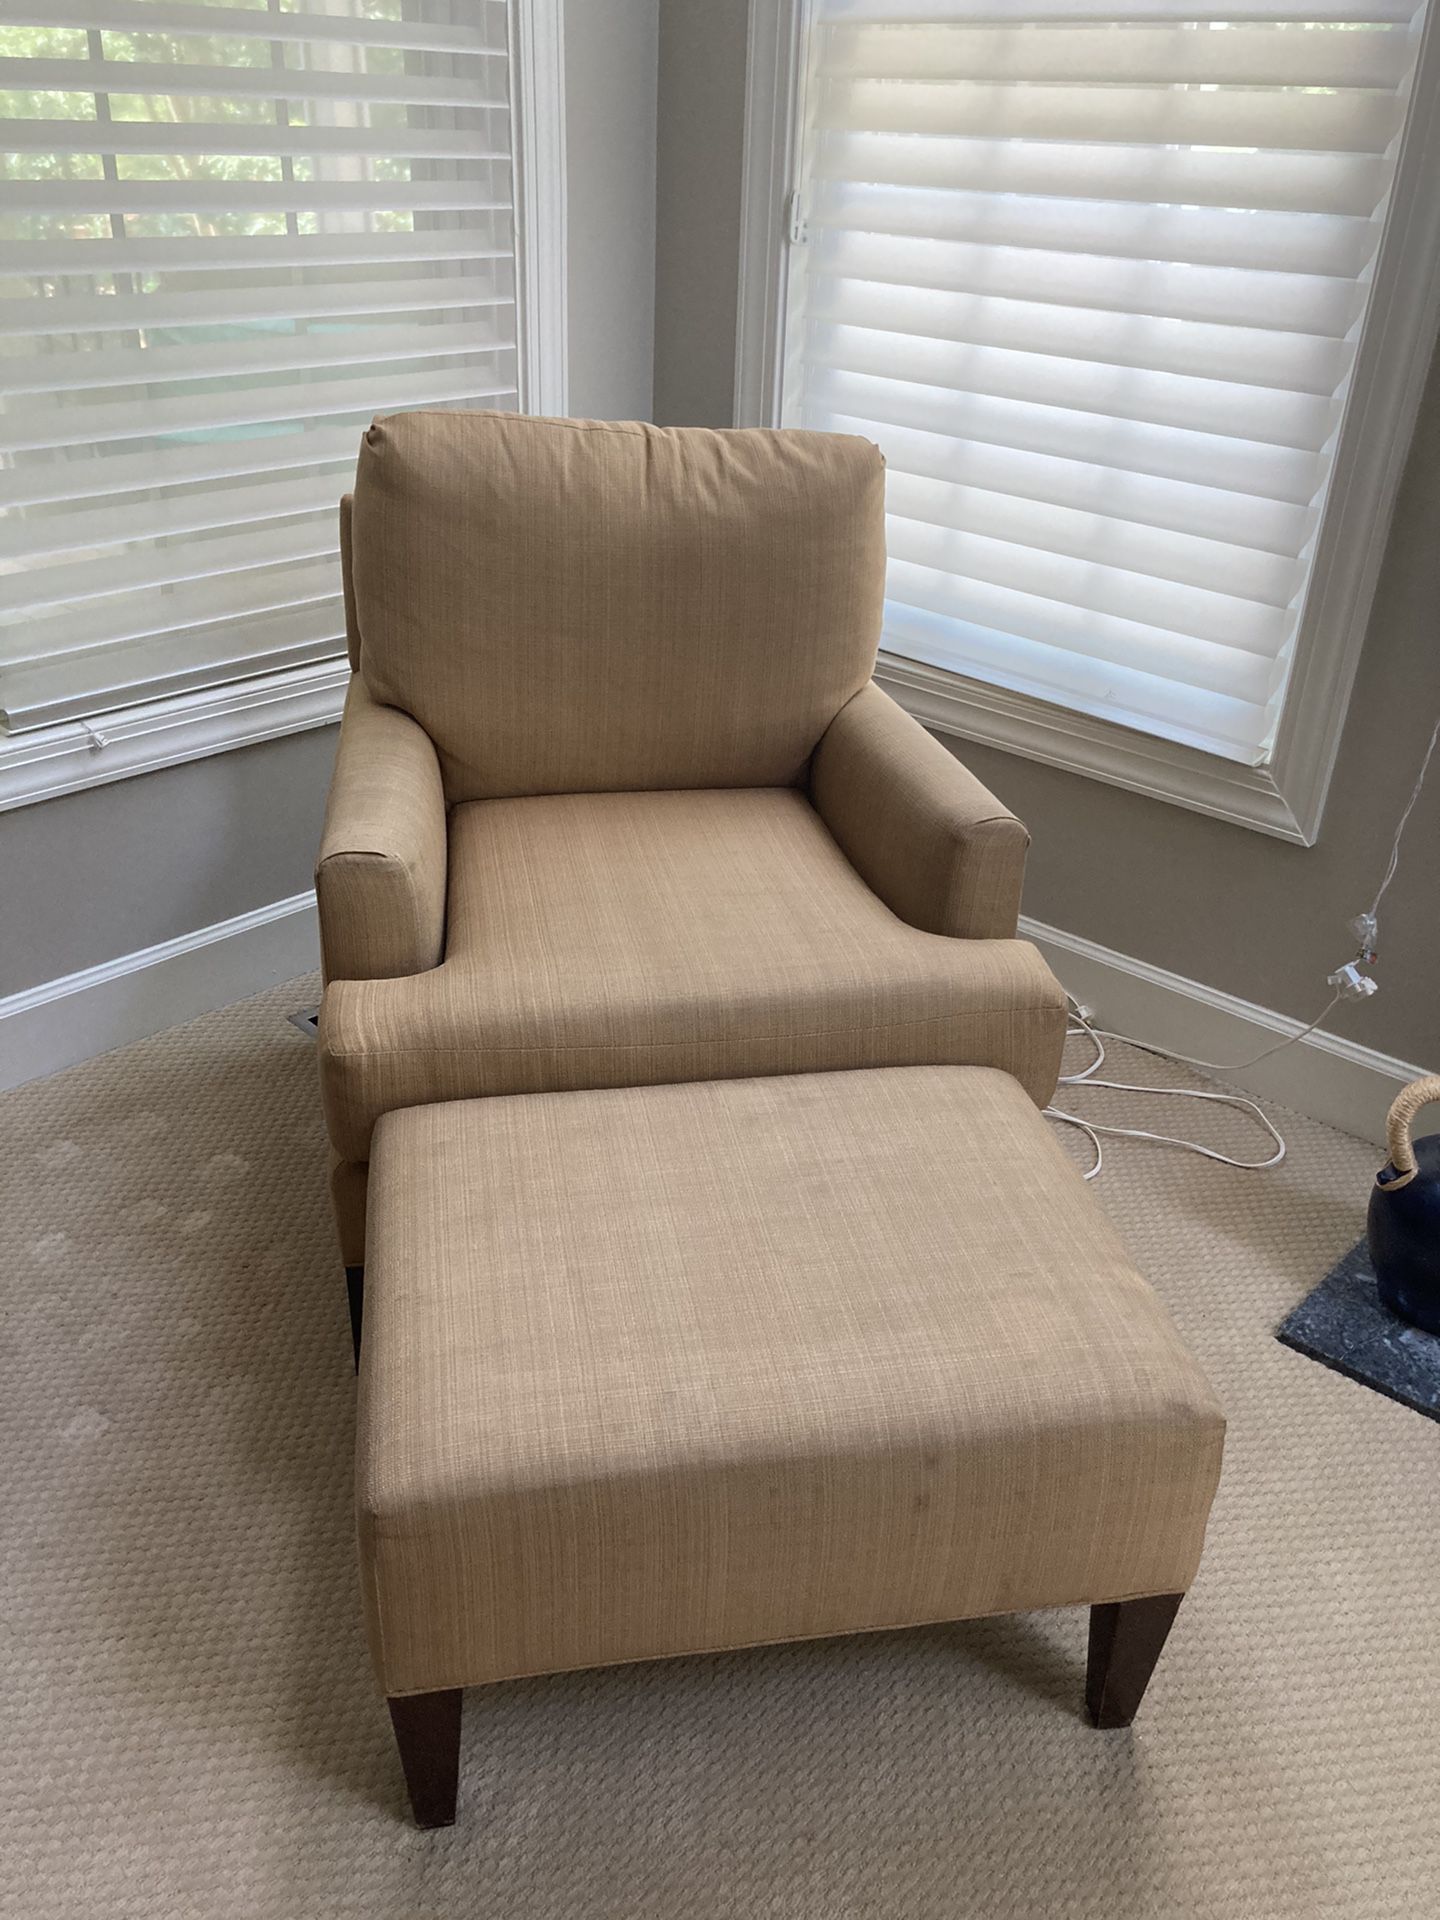 Gold/Tan Arm Chair With Ottoman